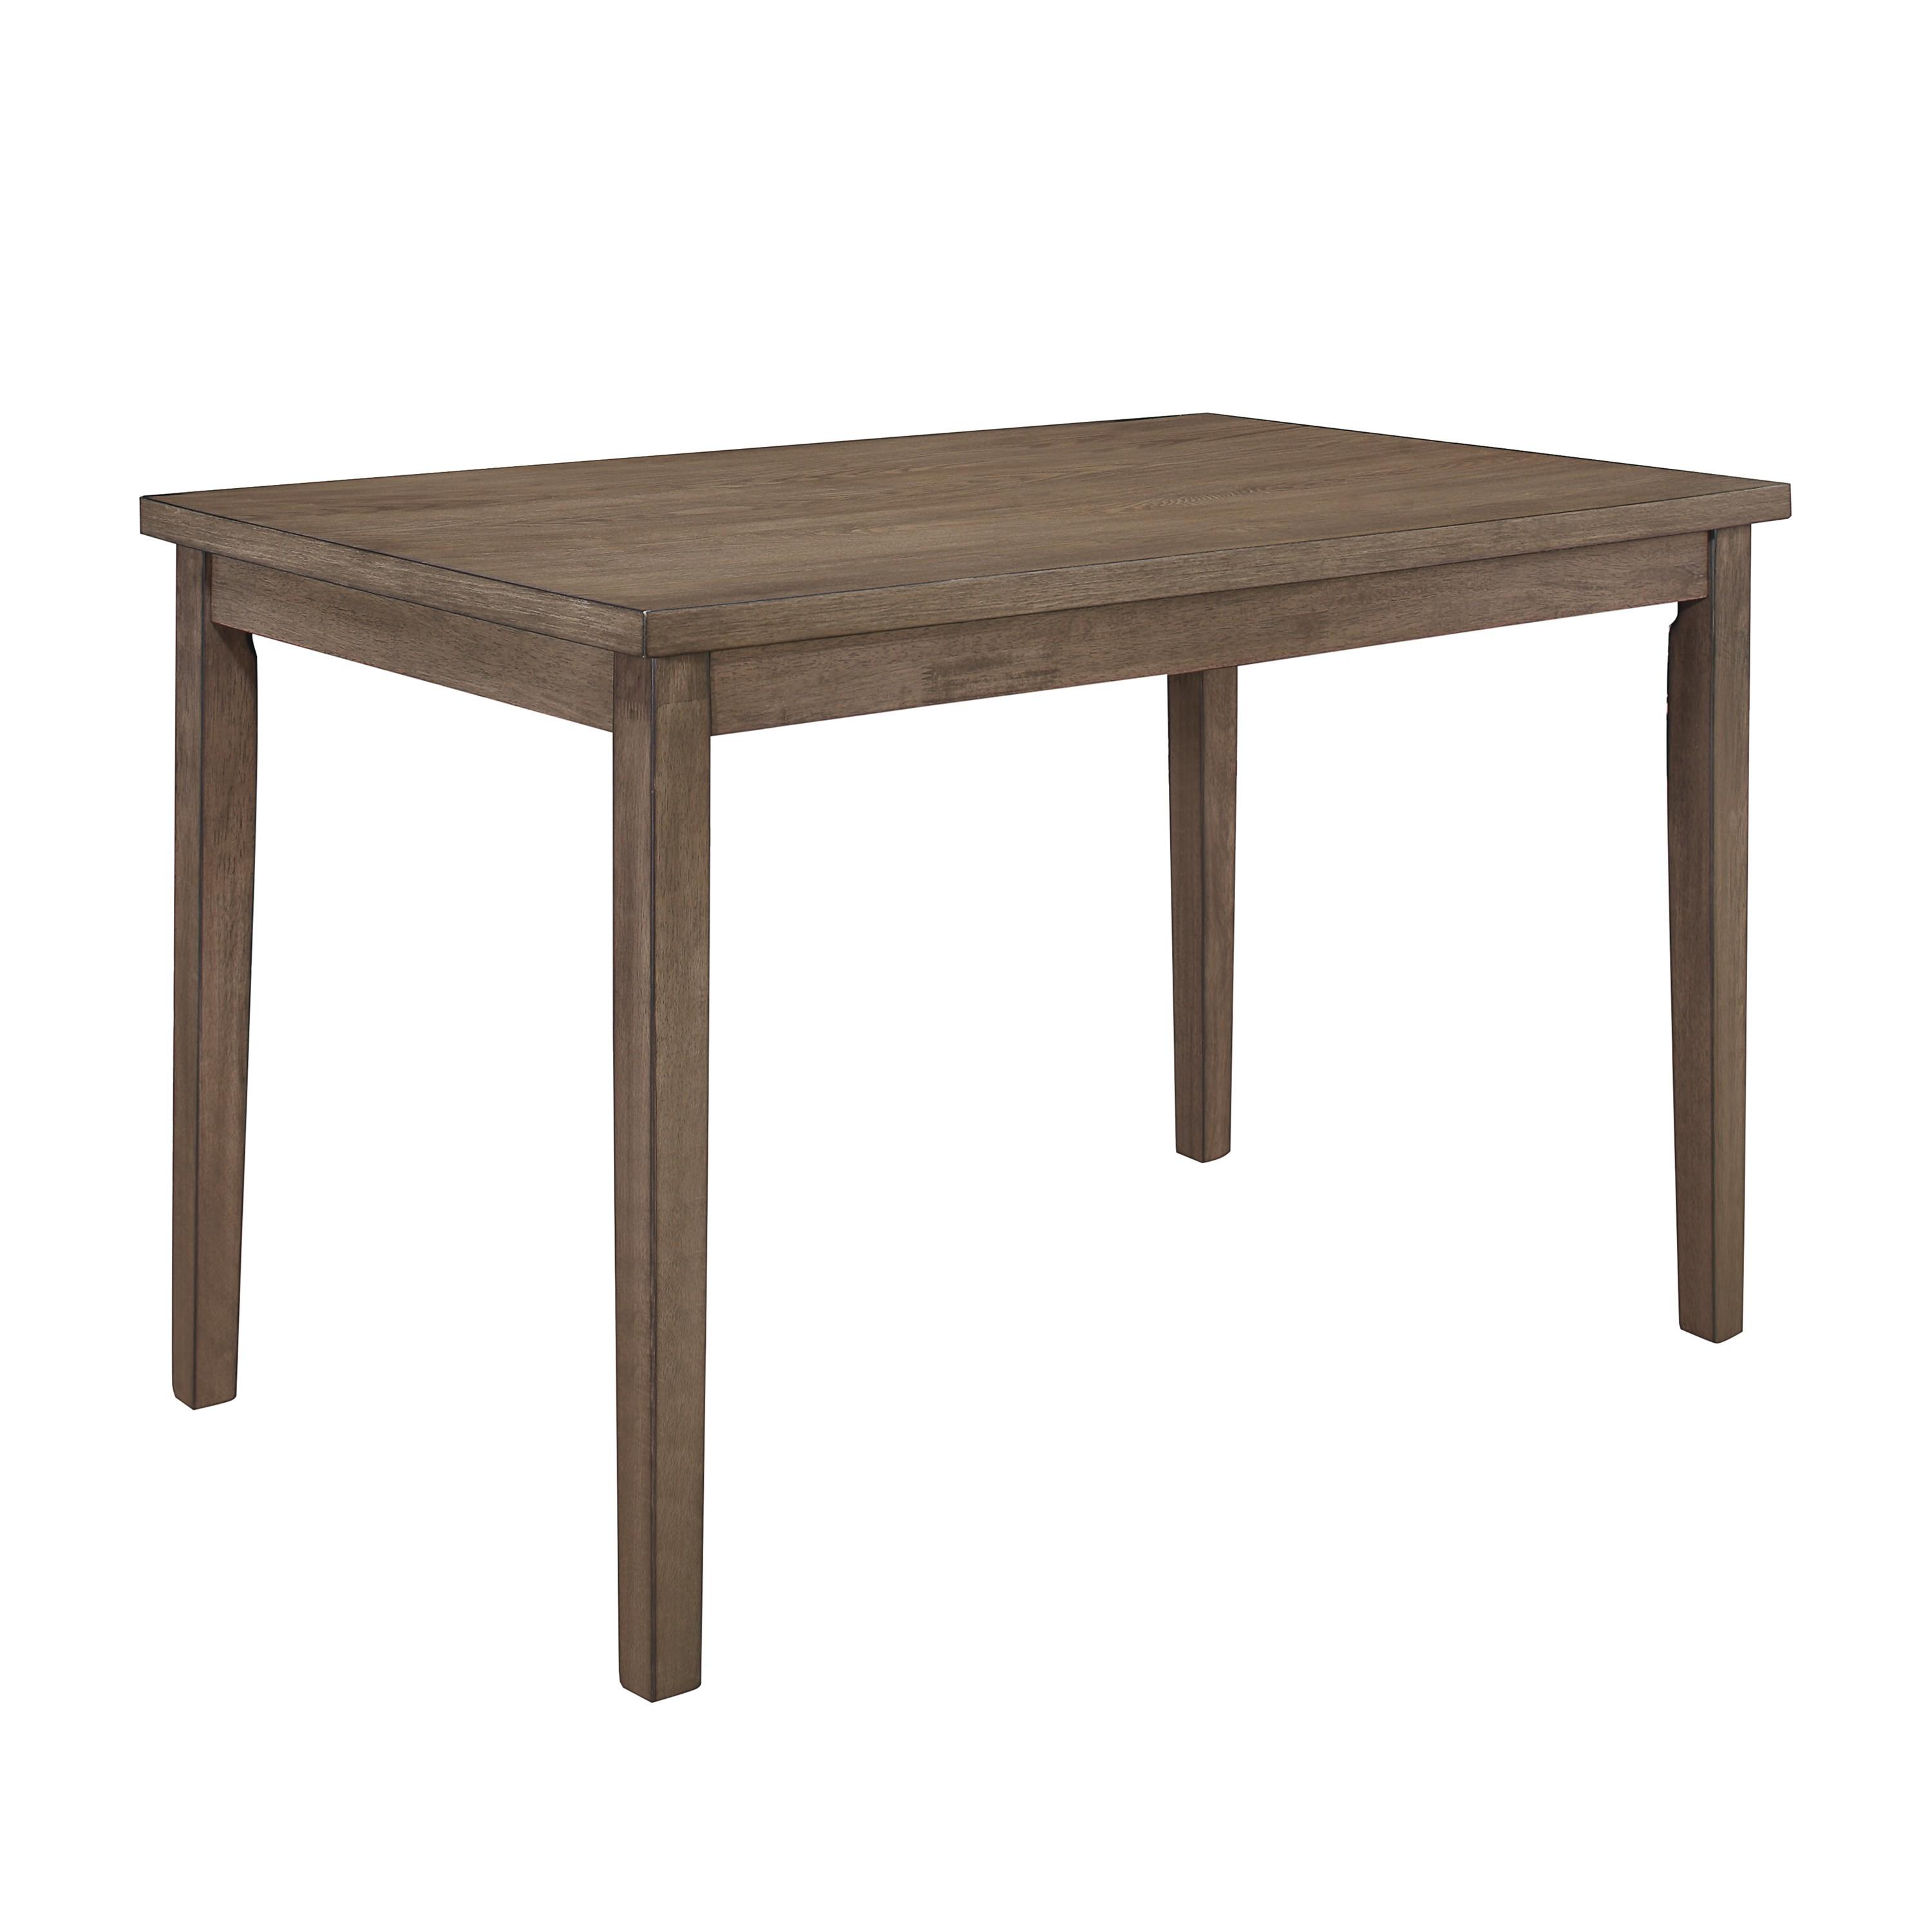 Transitional Dining Table 5039BR-48 Ahmet 5039BR-48 in Walnut 